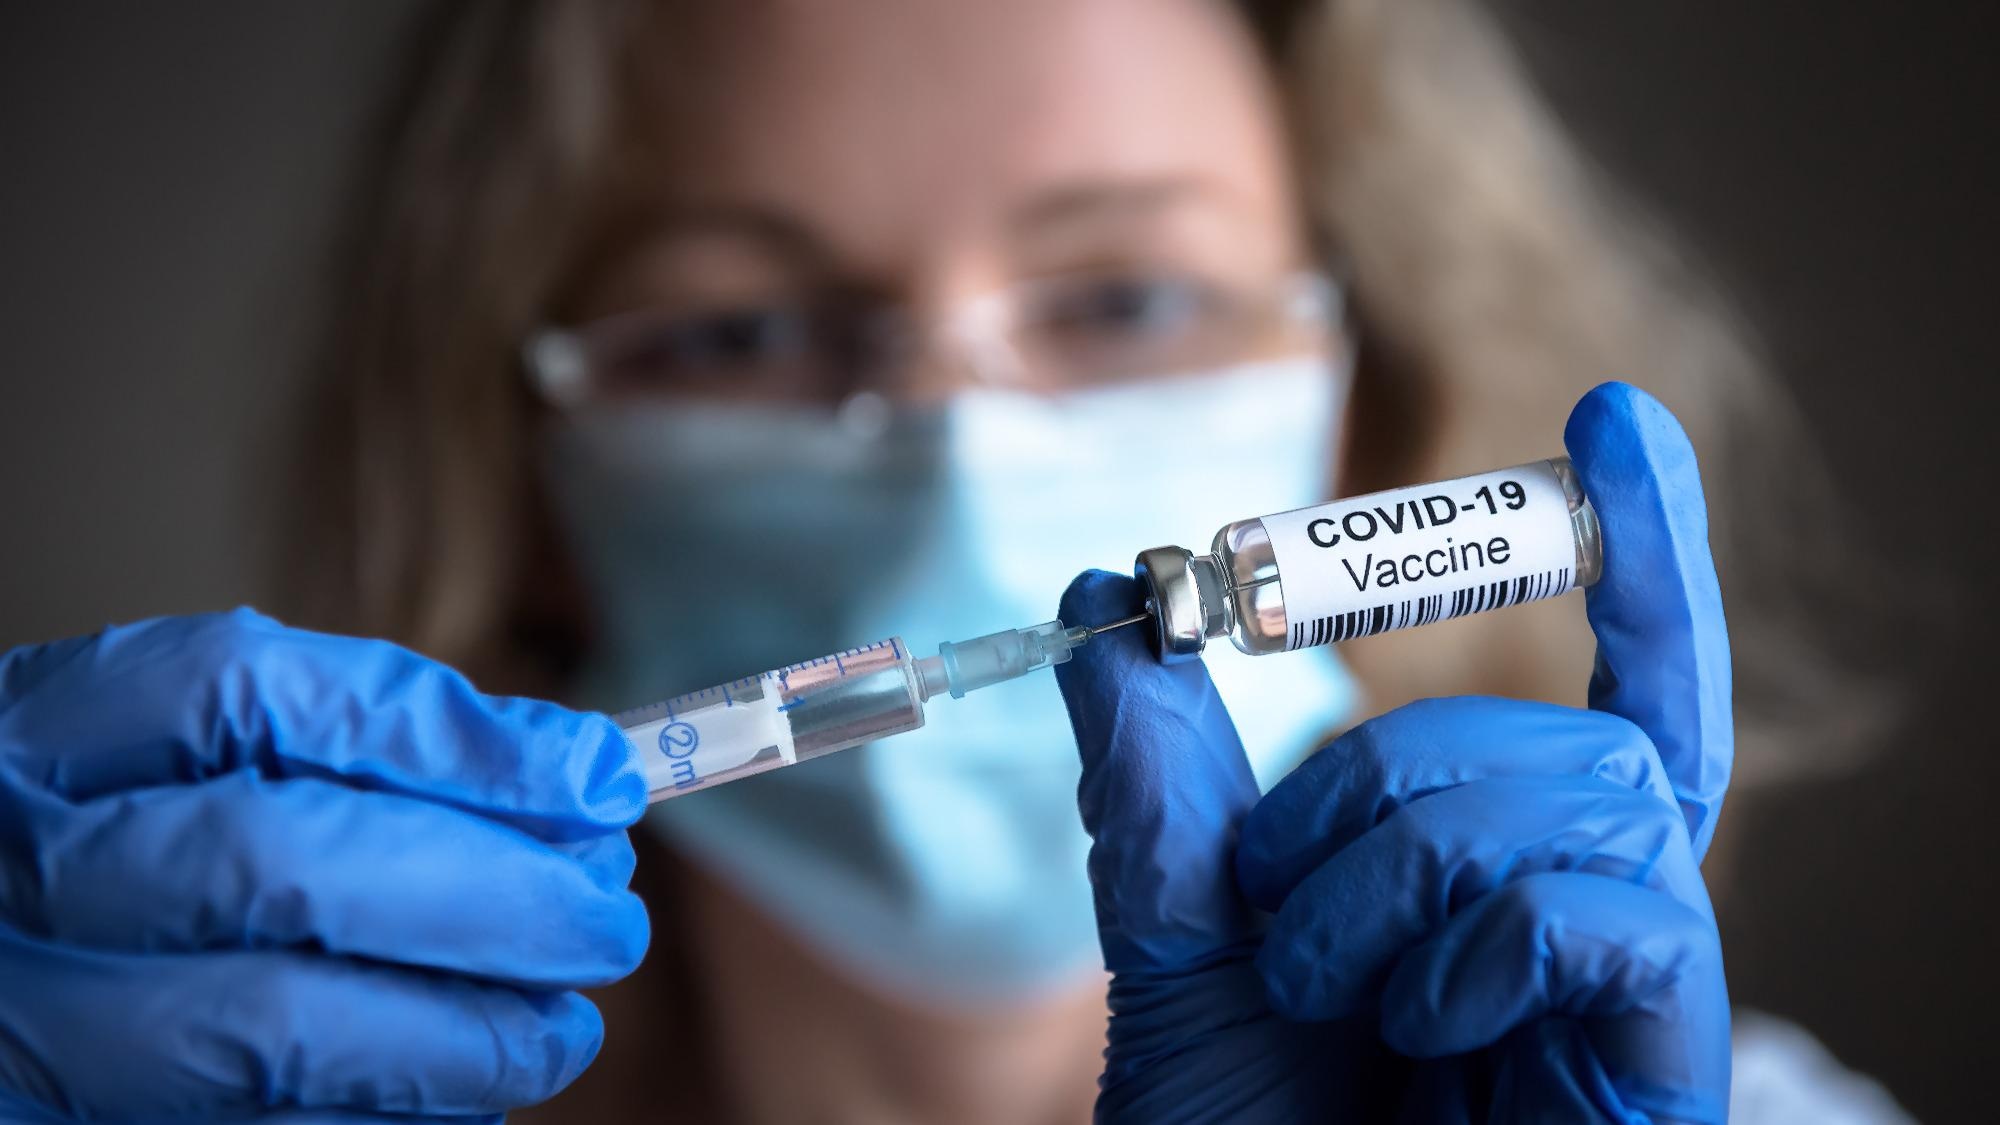 Study: Safety and Efficacy of a Third Dose of BNT162b2 Covid-19 Vaccine. Image Credit: Viacheslav Lopatin / Shutterstock